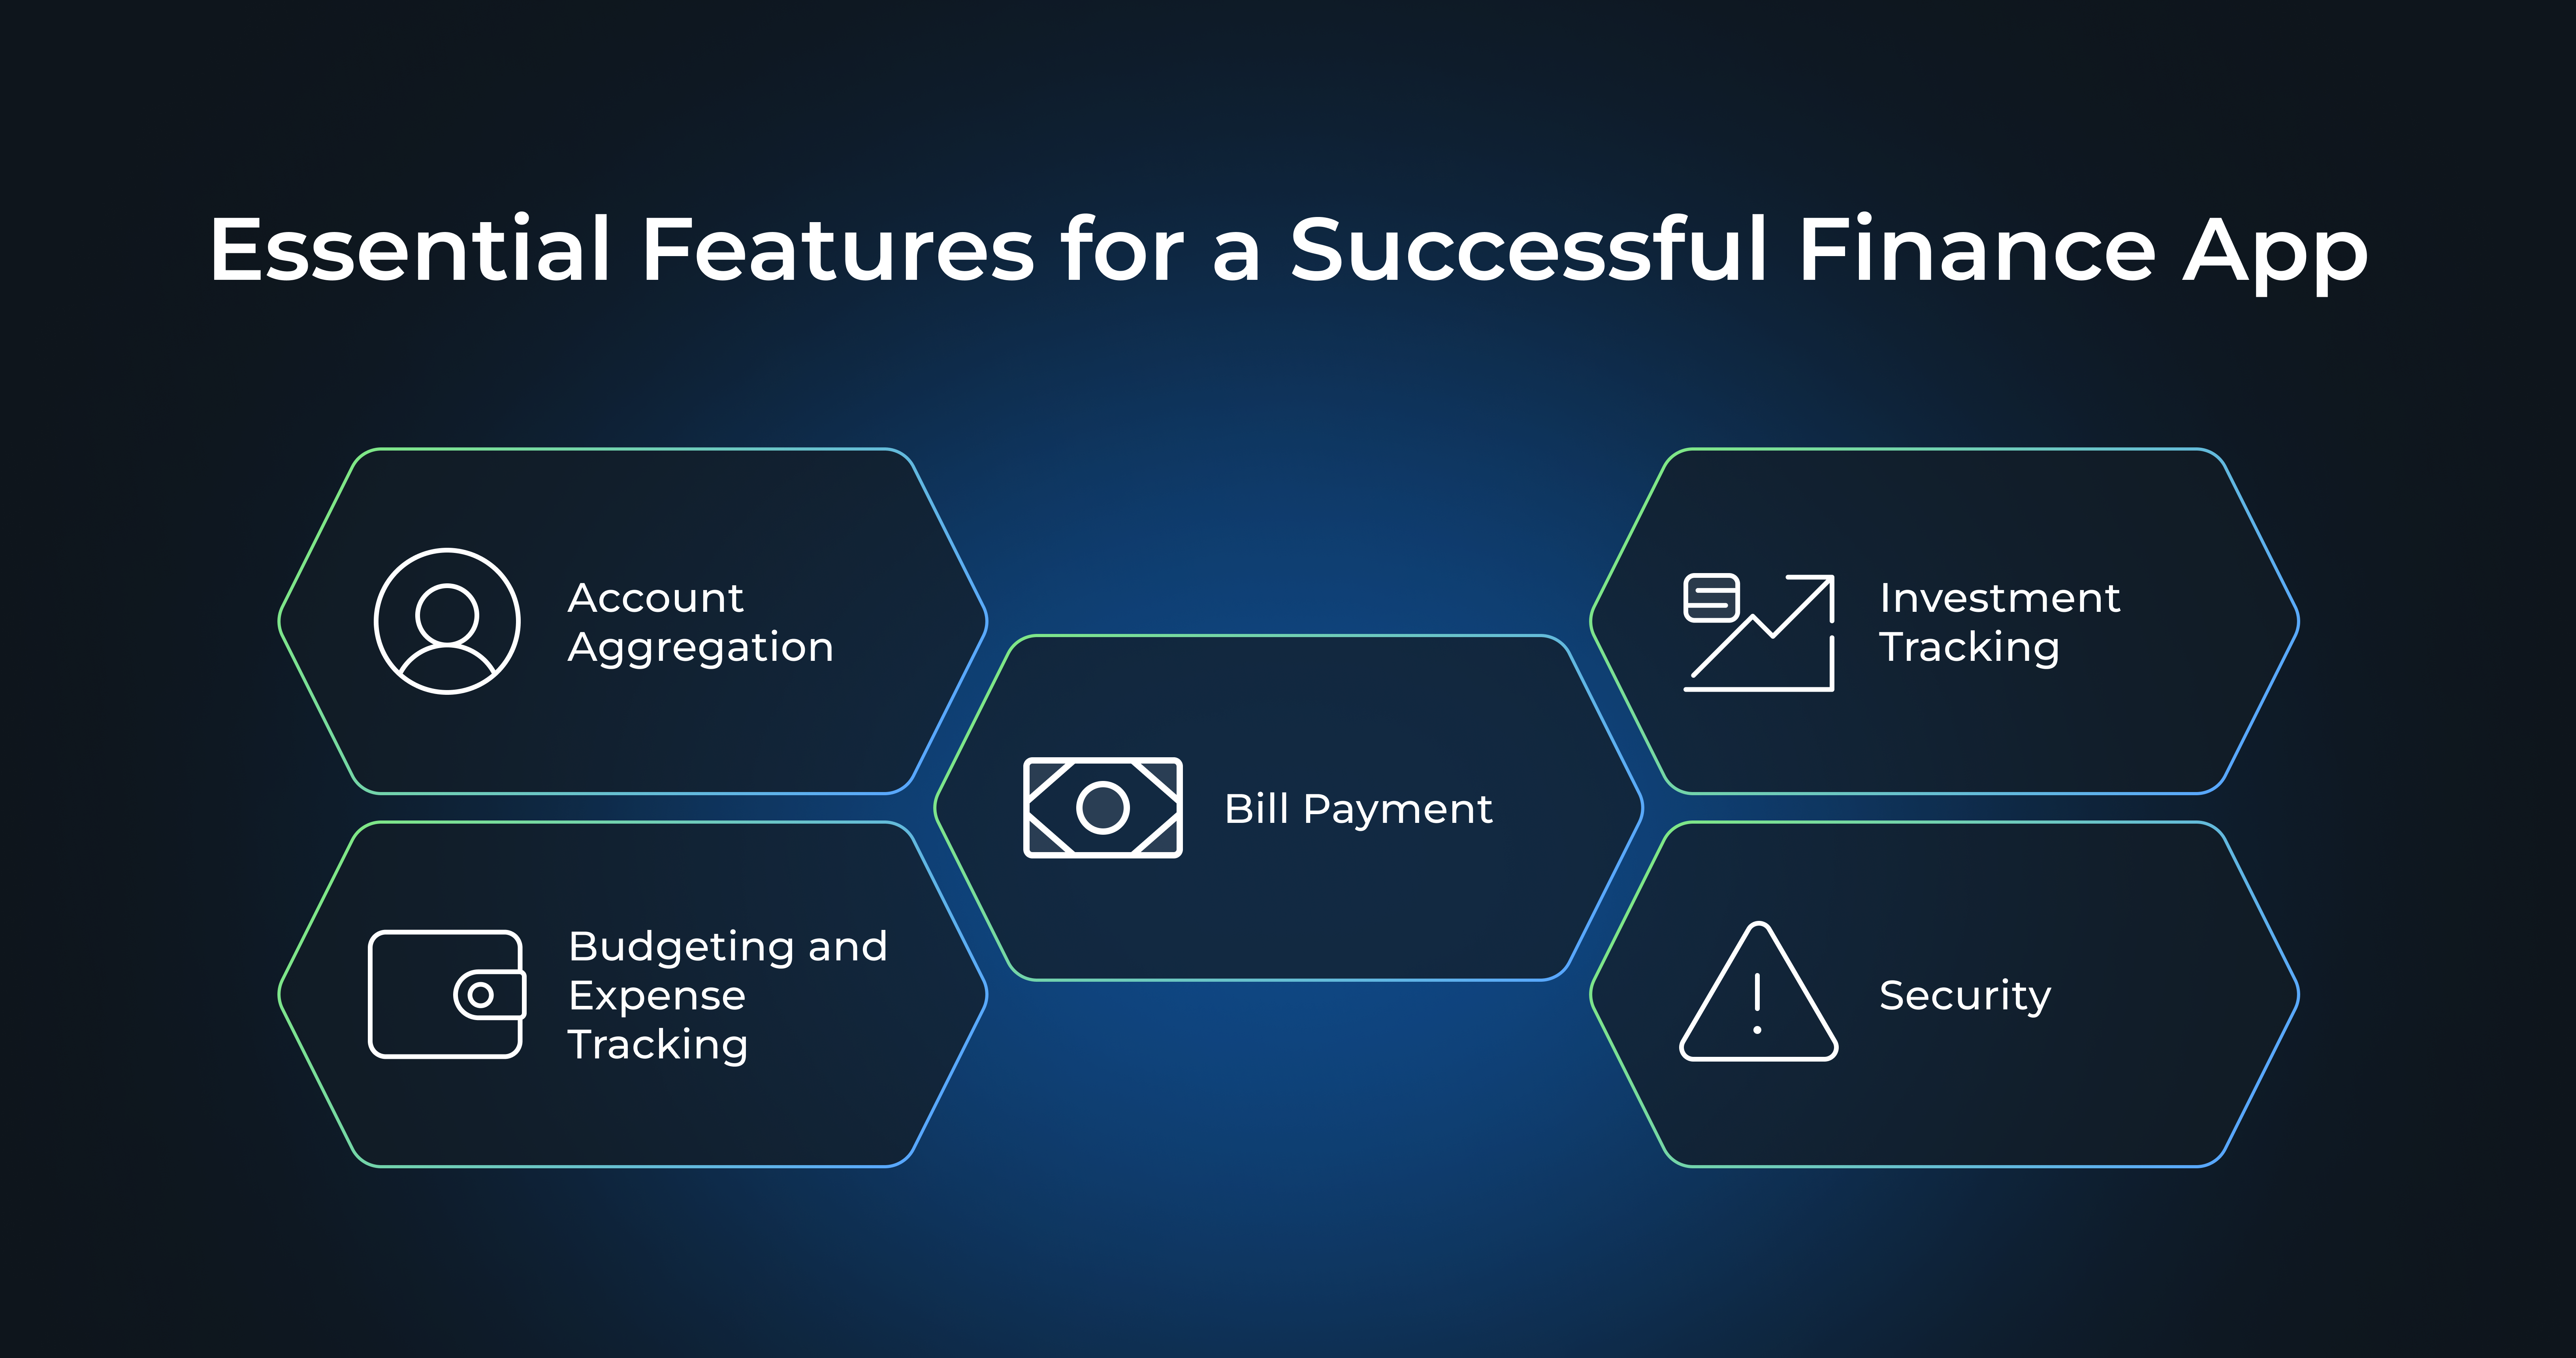 Essential Features for a Successful Finance App: Account Aggregation, Budgeting and Expense Tracking, Bill, Payment, Investment Tracking, Security
